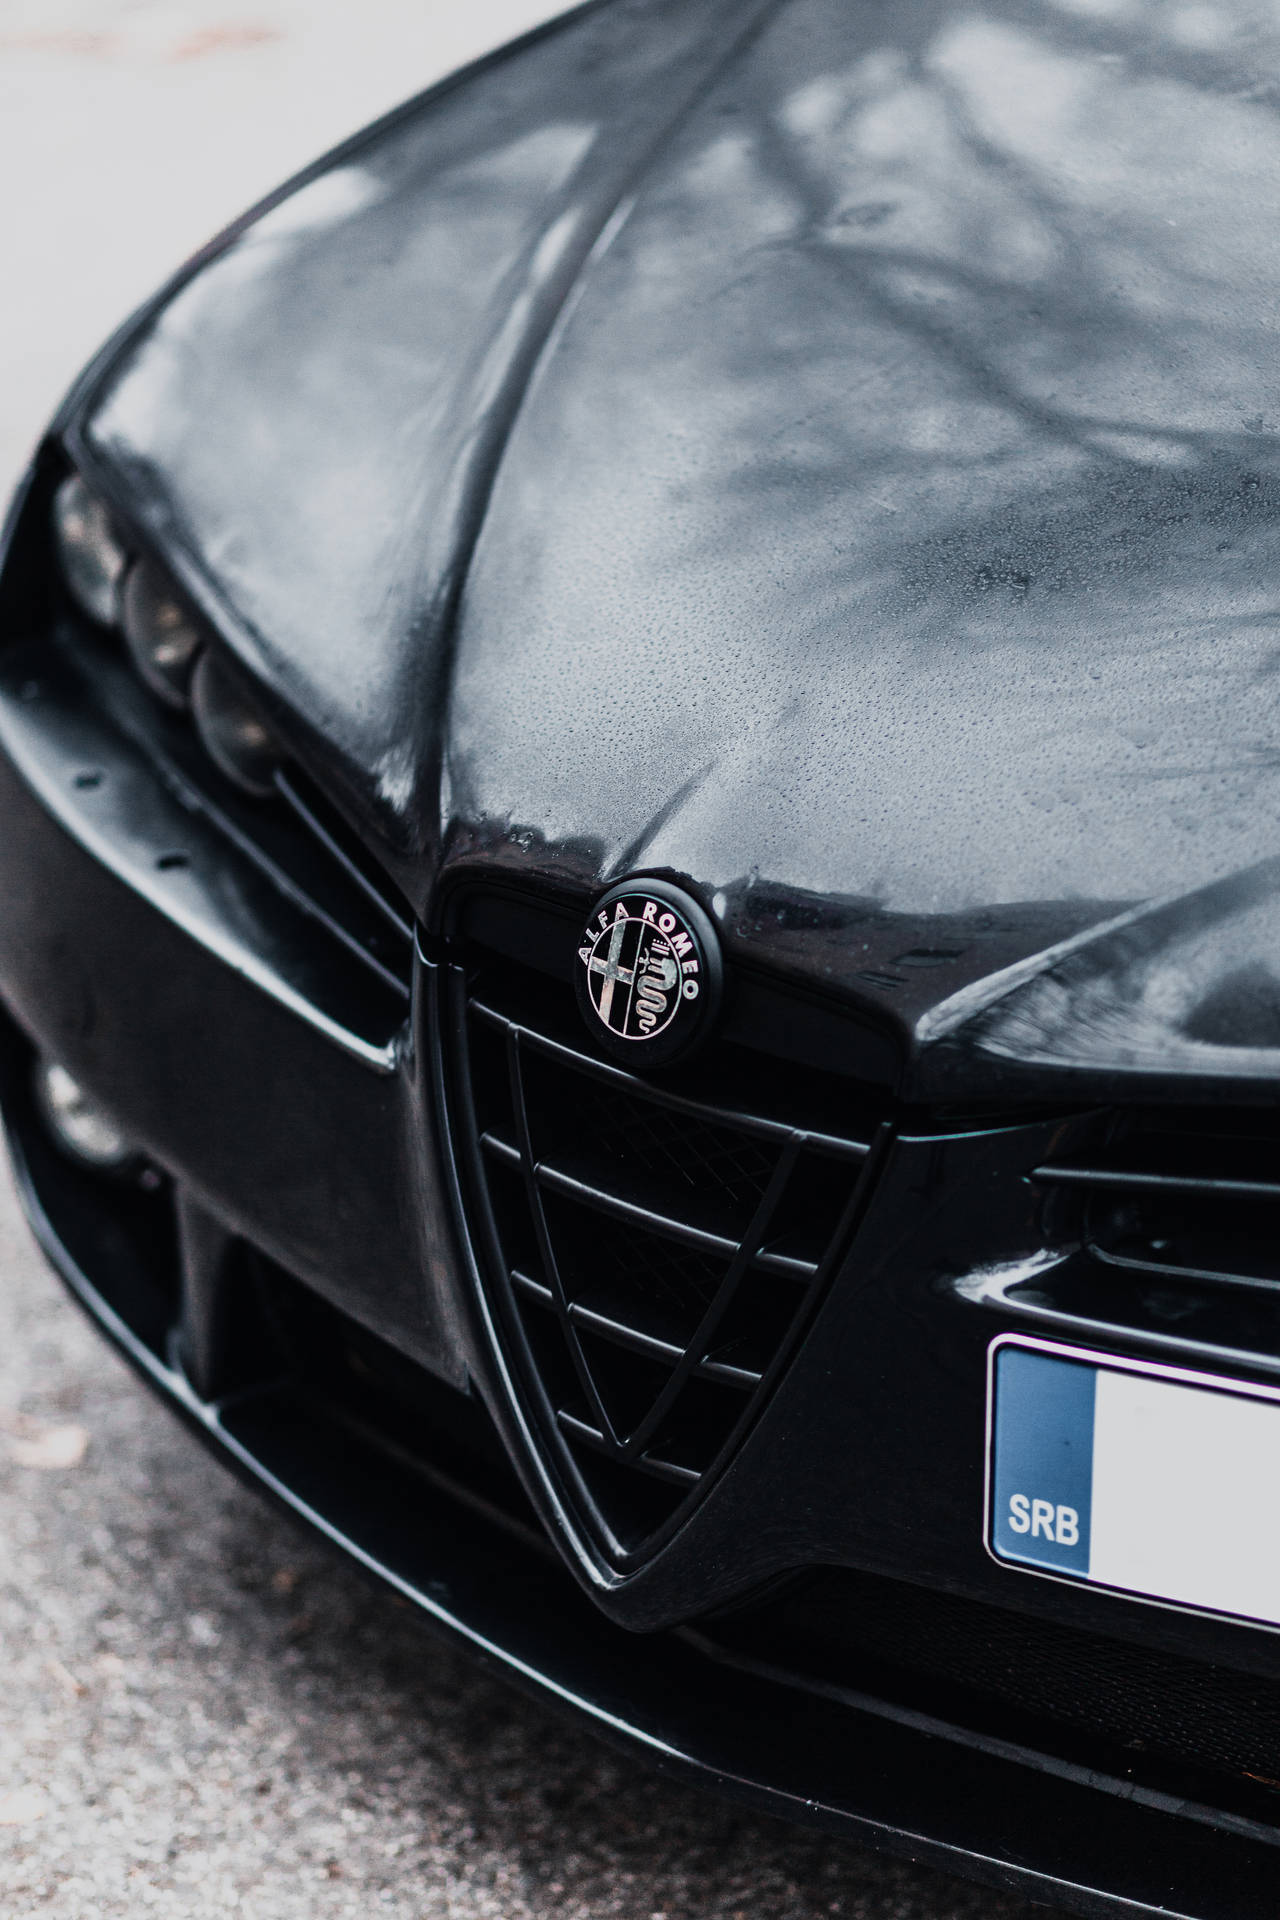 Black Alfa Romeo close-up with red cross and biscione snake logo wallpaper.